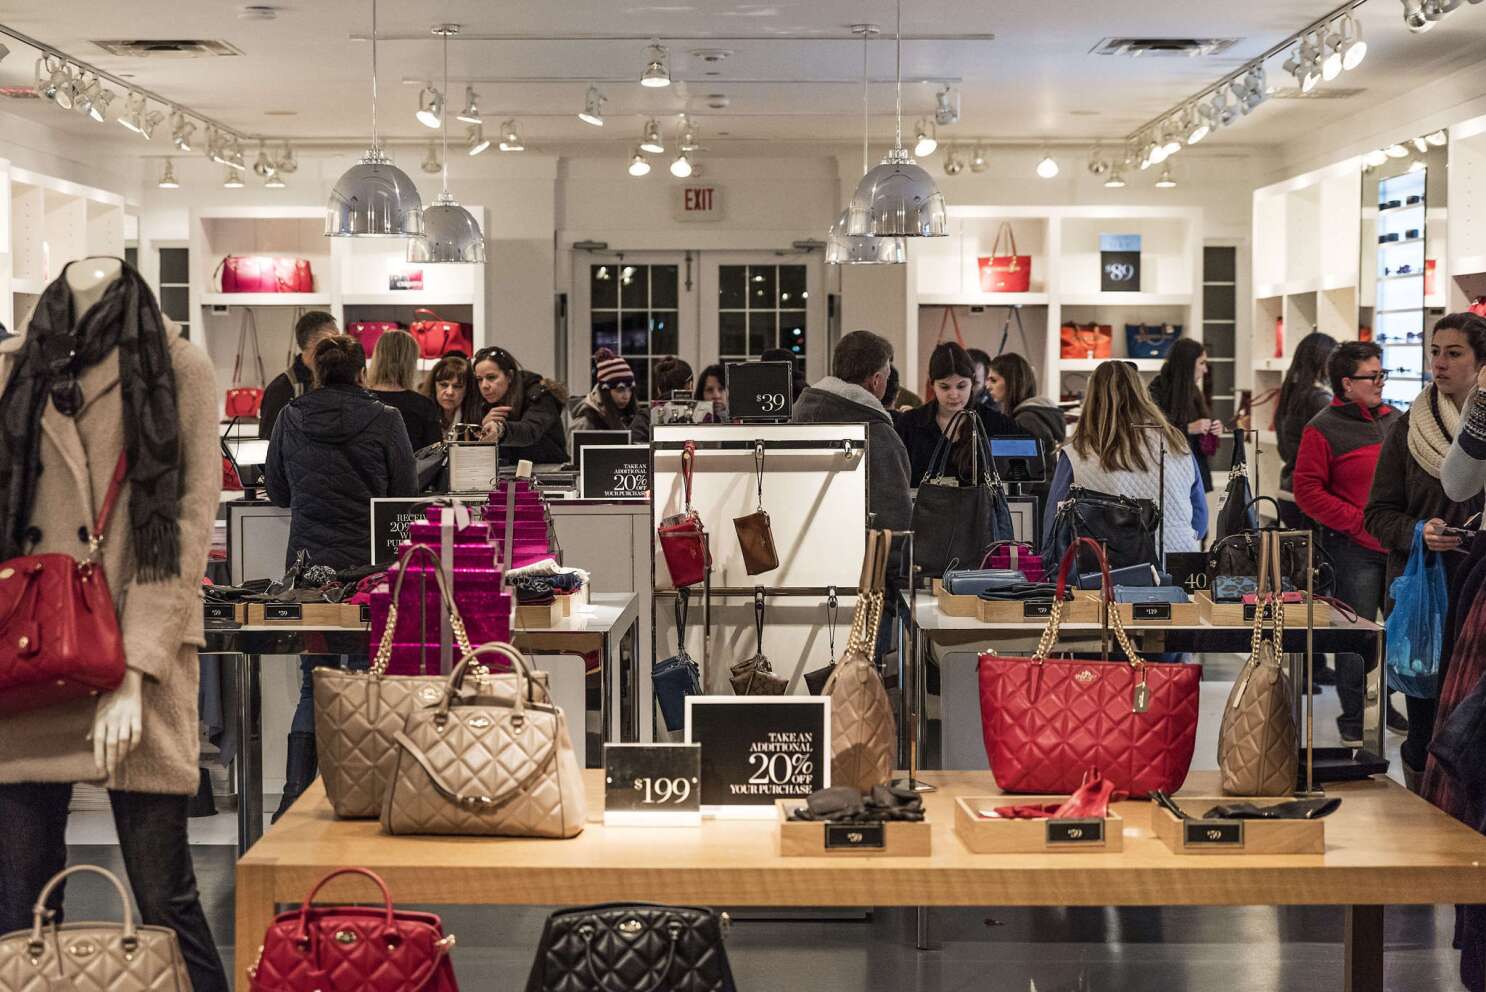 Michael Kors Has an Image Problem, Analysts Say